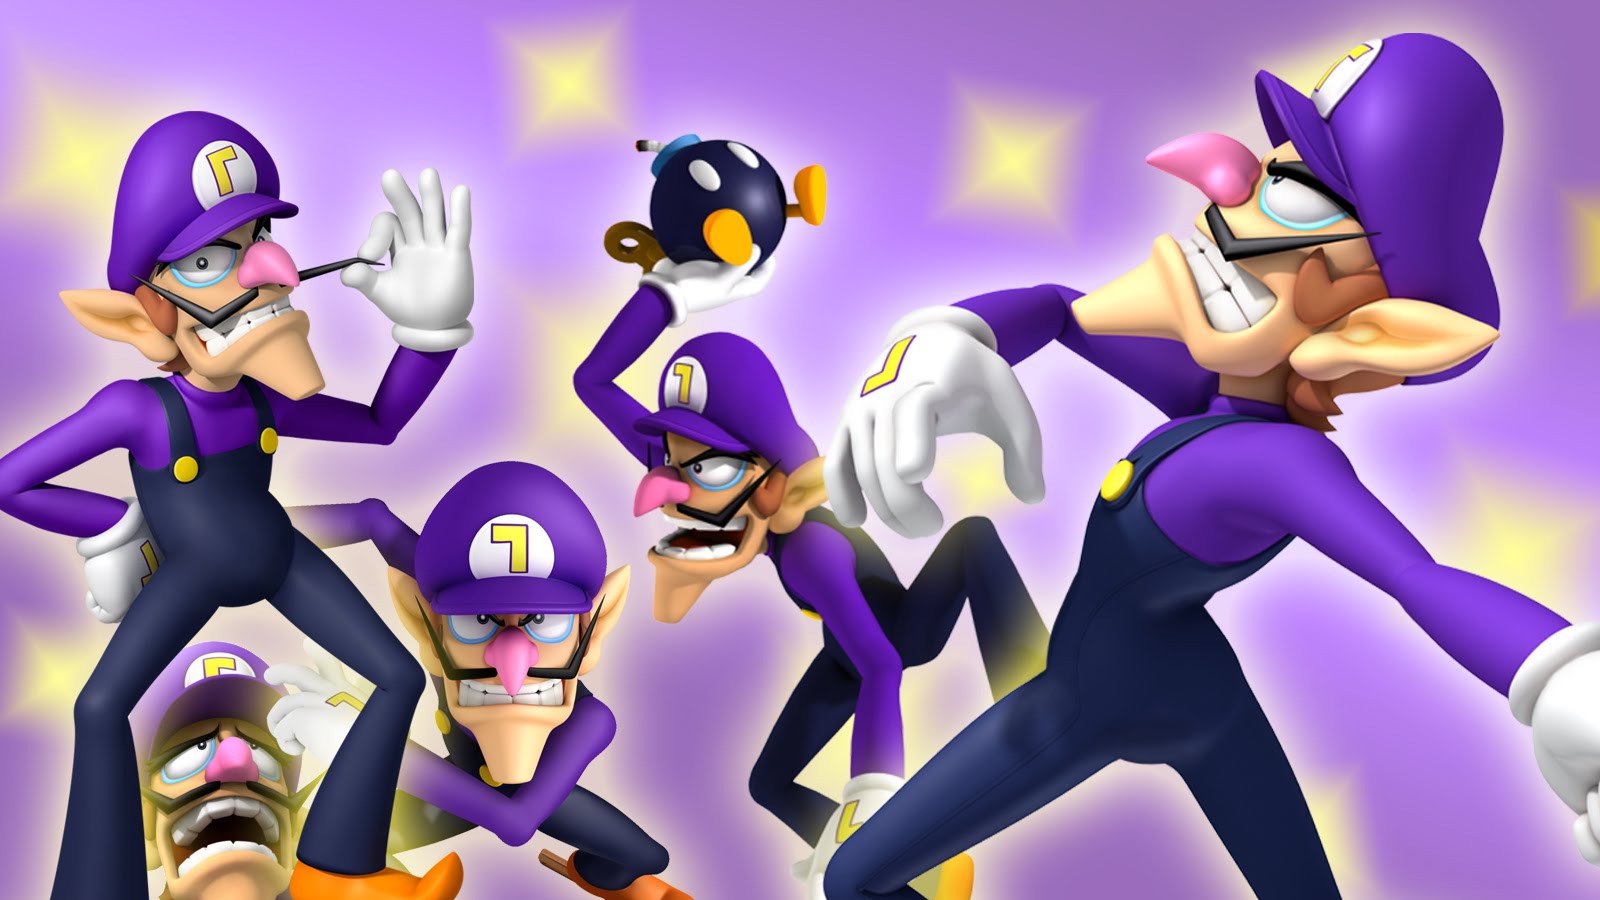 Find more Waluigi is Mankinds Greatest Accomplishment NWC. 